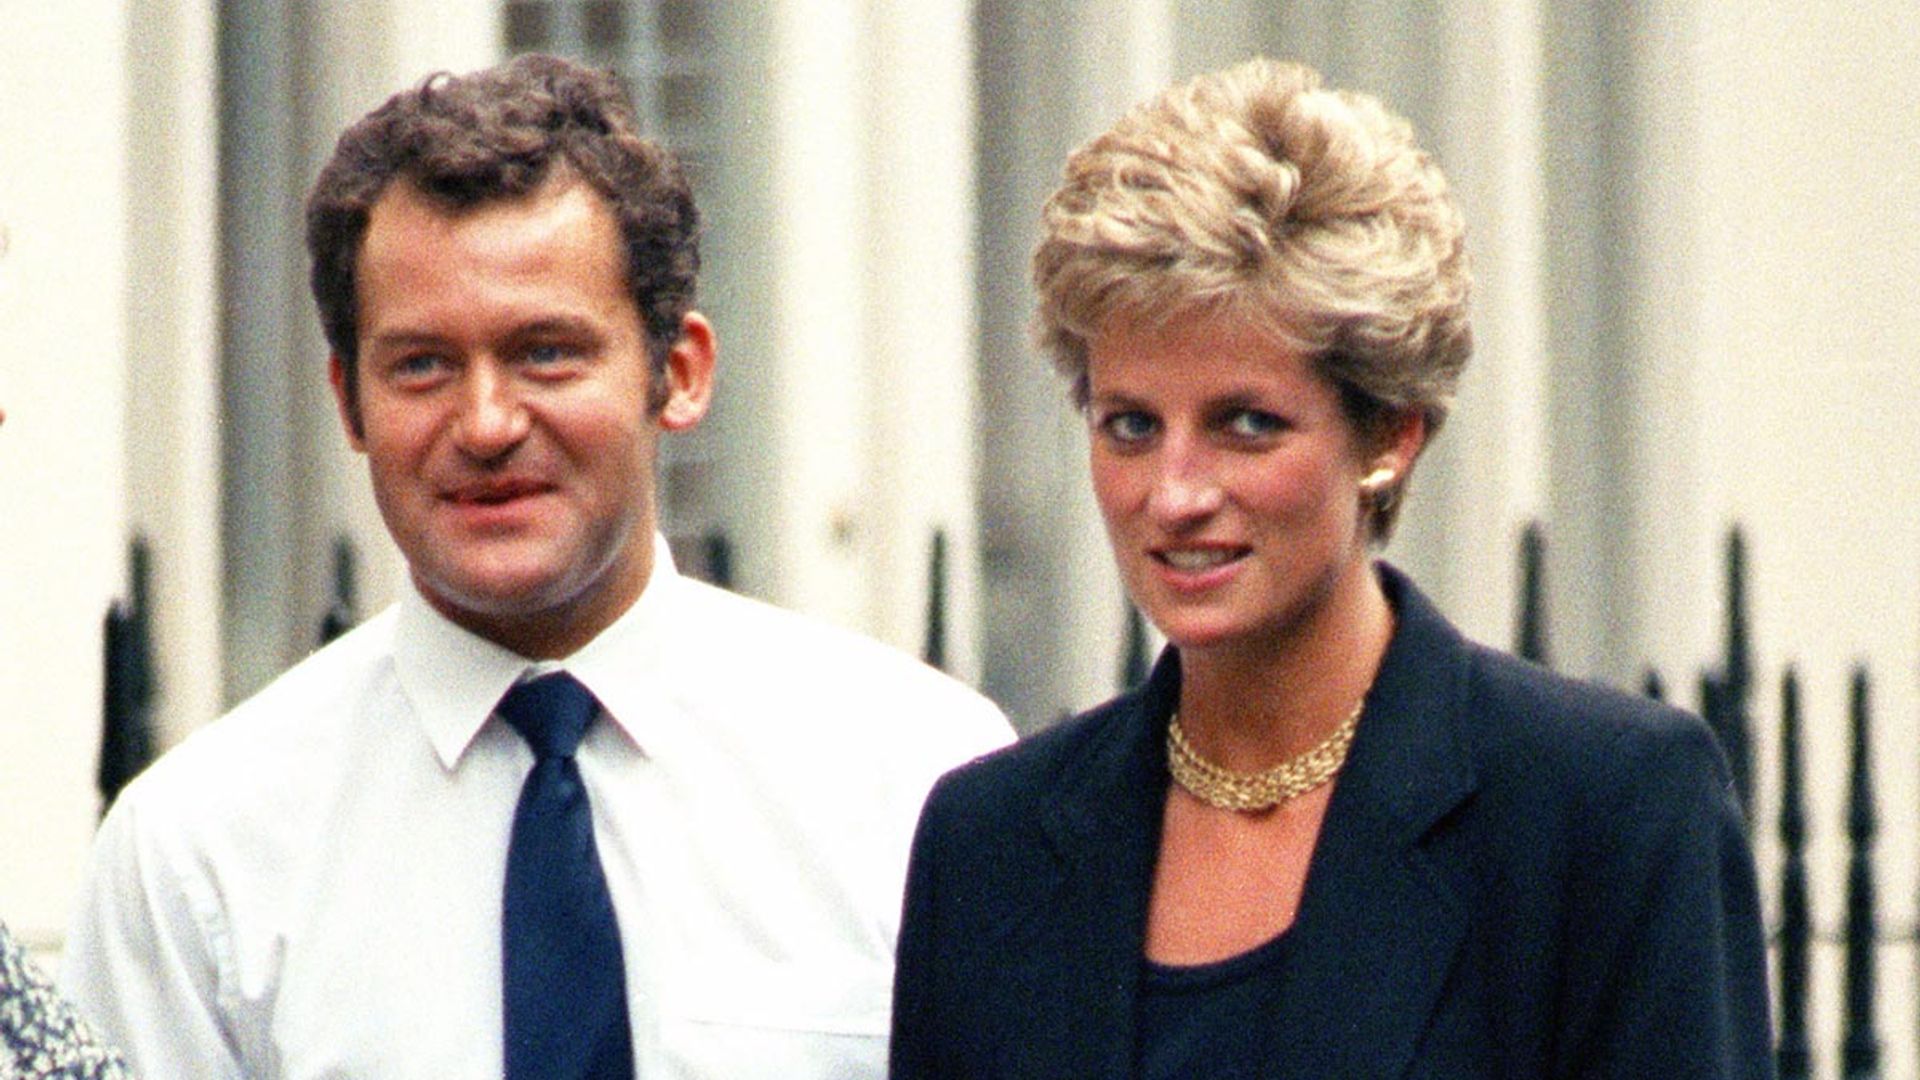 Princess Diana's former butler Paul Burrell shares photos from inside royal palaces he lived in